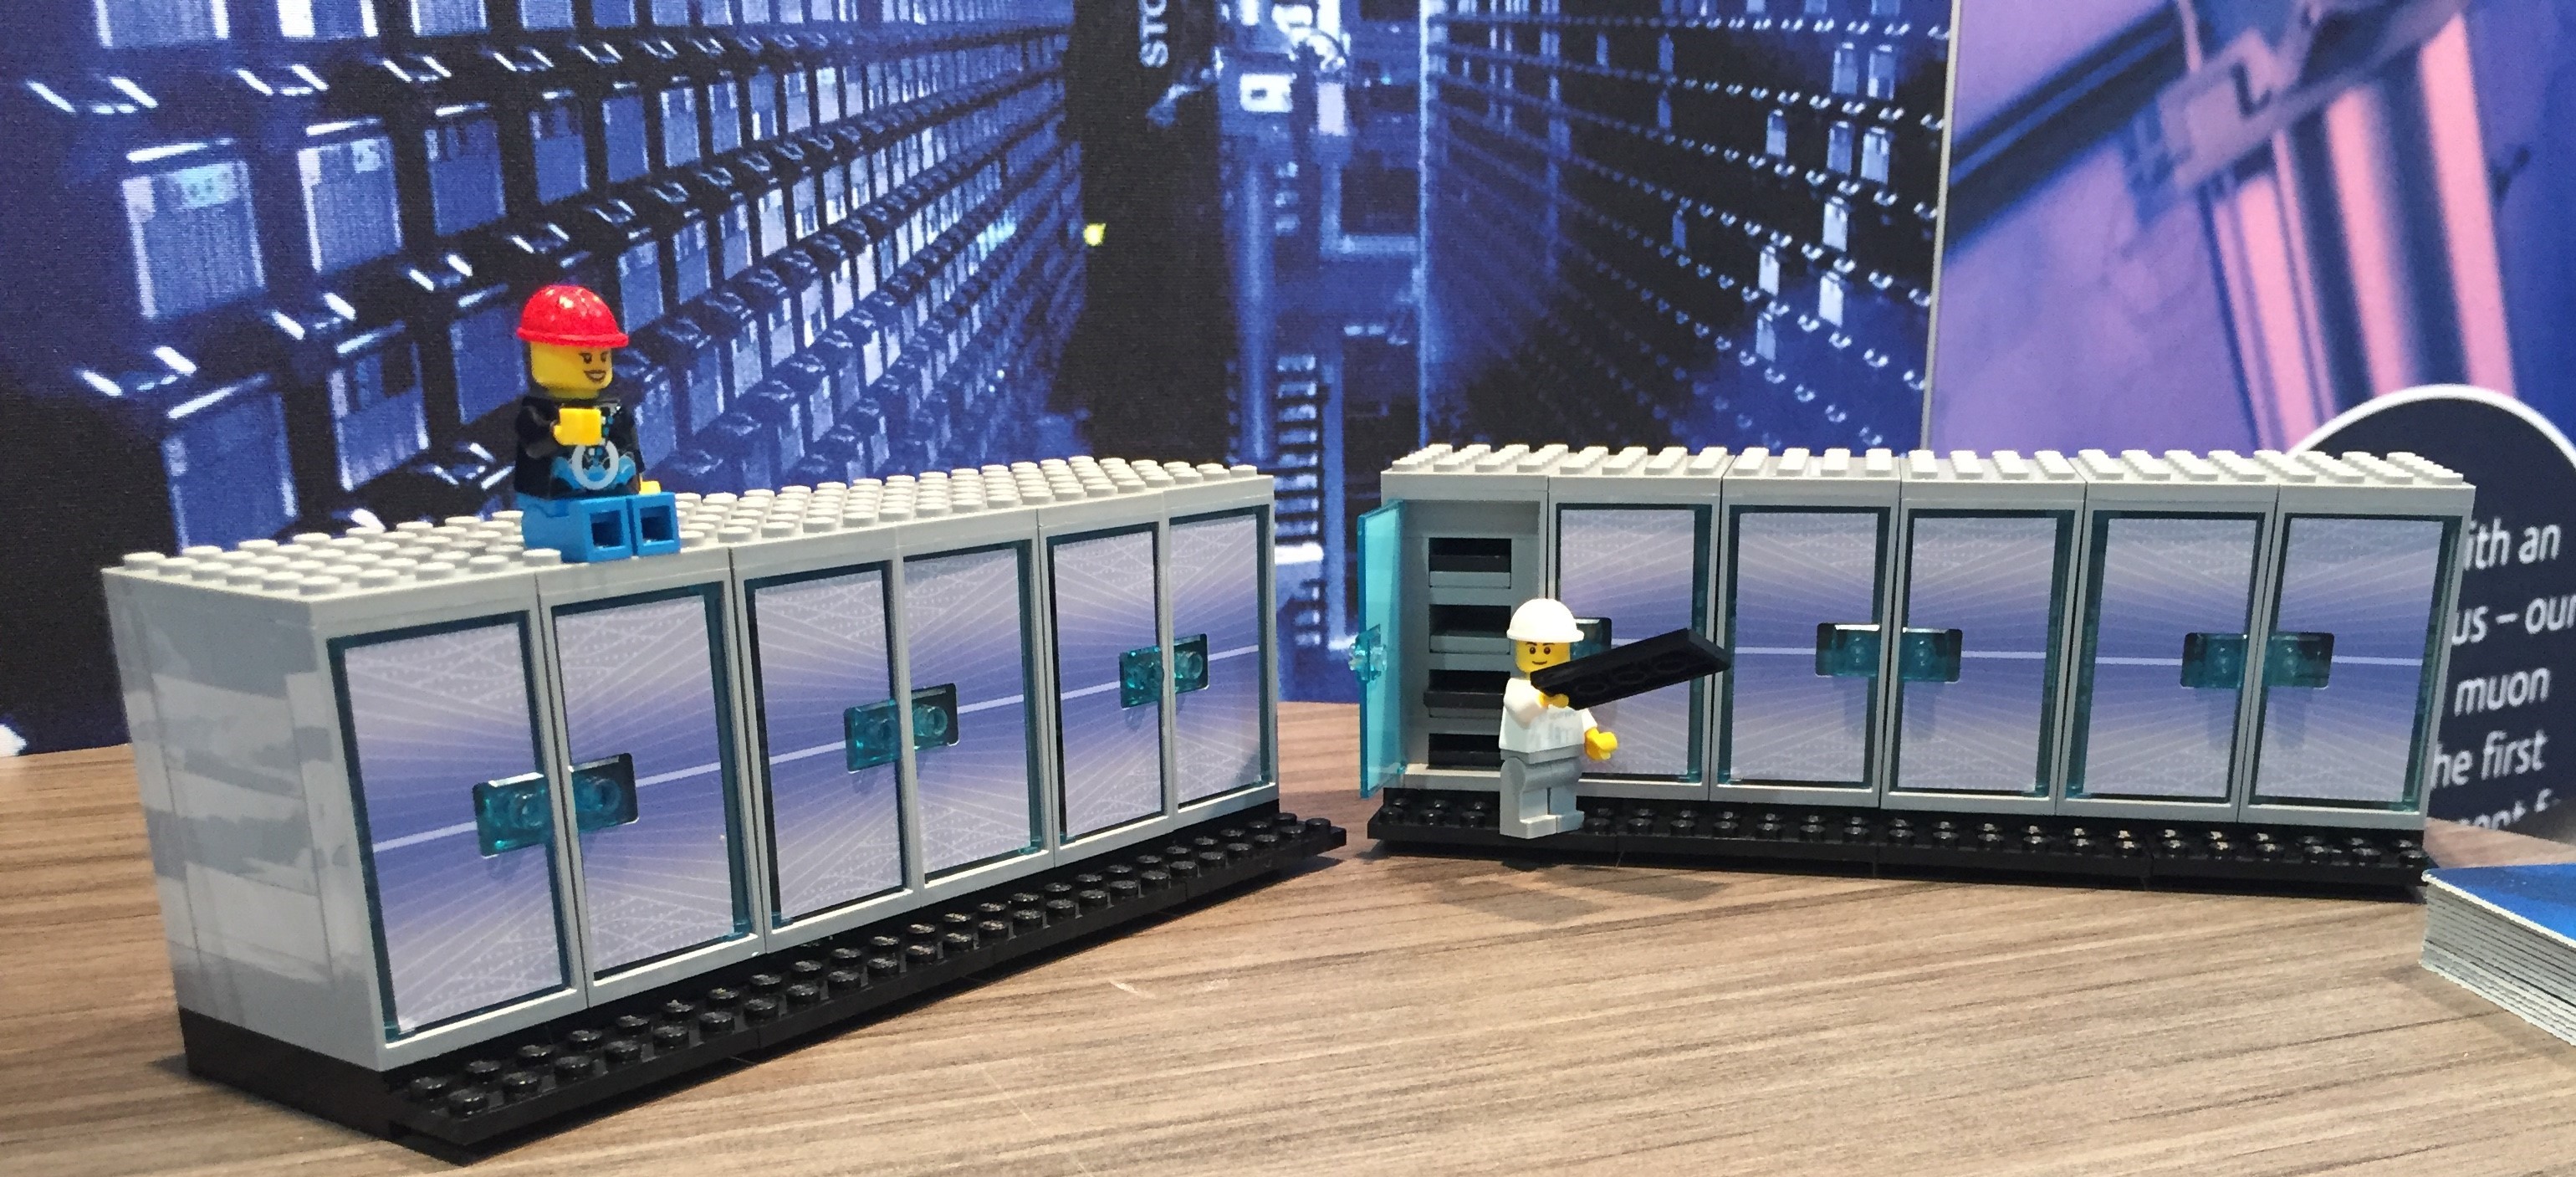 Lego style model of rack from Scafell Pike supercomputer